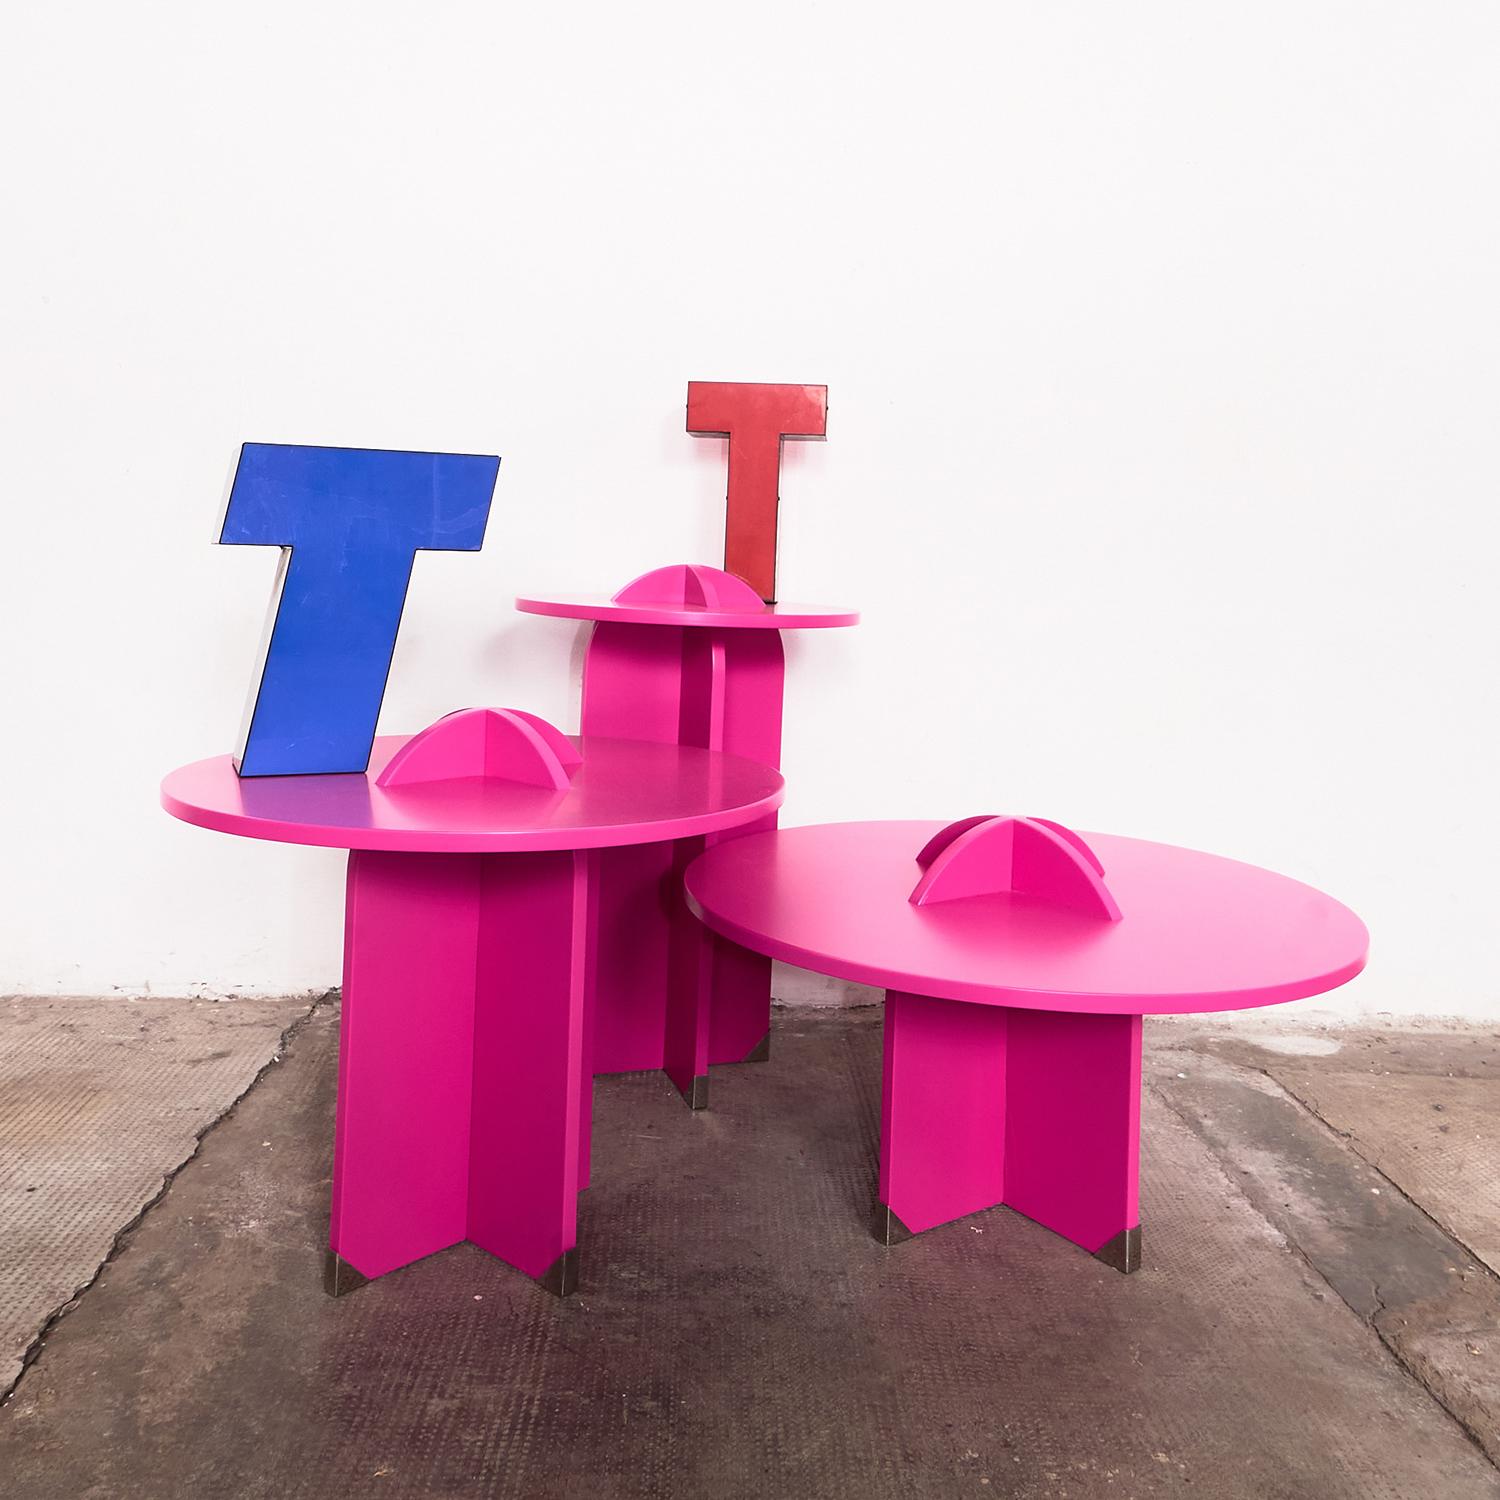 Part of the F4 Collection of three small tables in different sizes and heights, this wooden side table will elevate any contemporary setting with its glamorous look marked a vivid fuchsia lacquer inspired by the iconic shade associated with punk